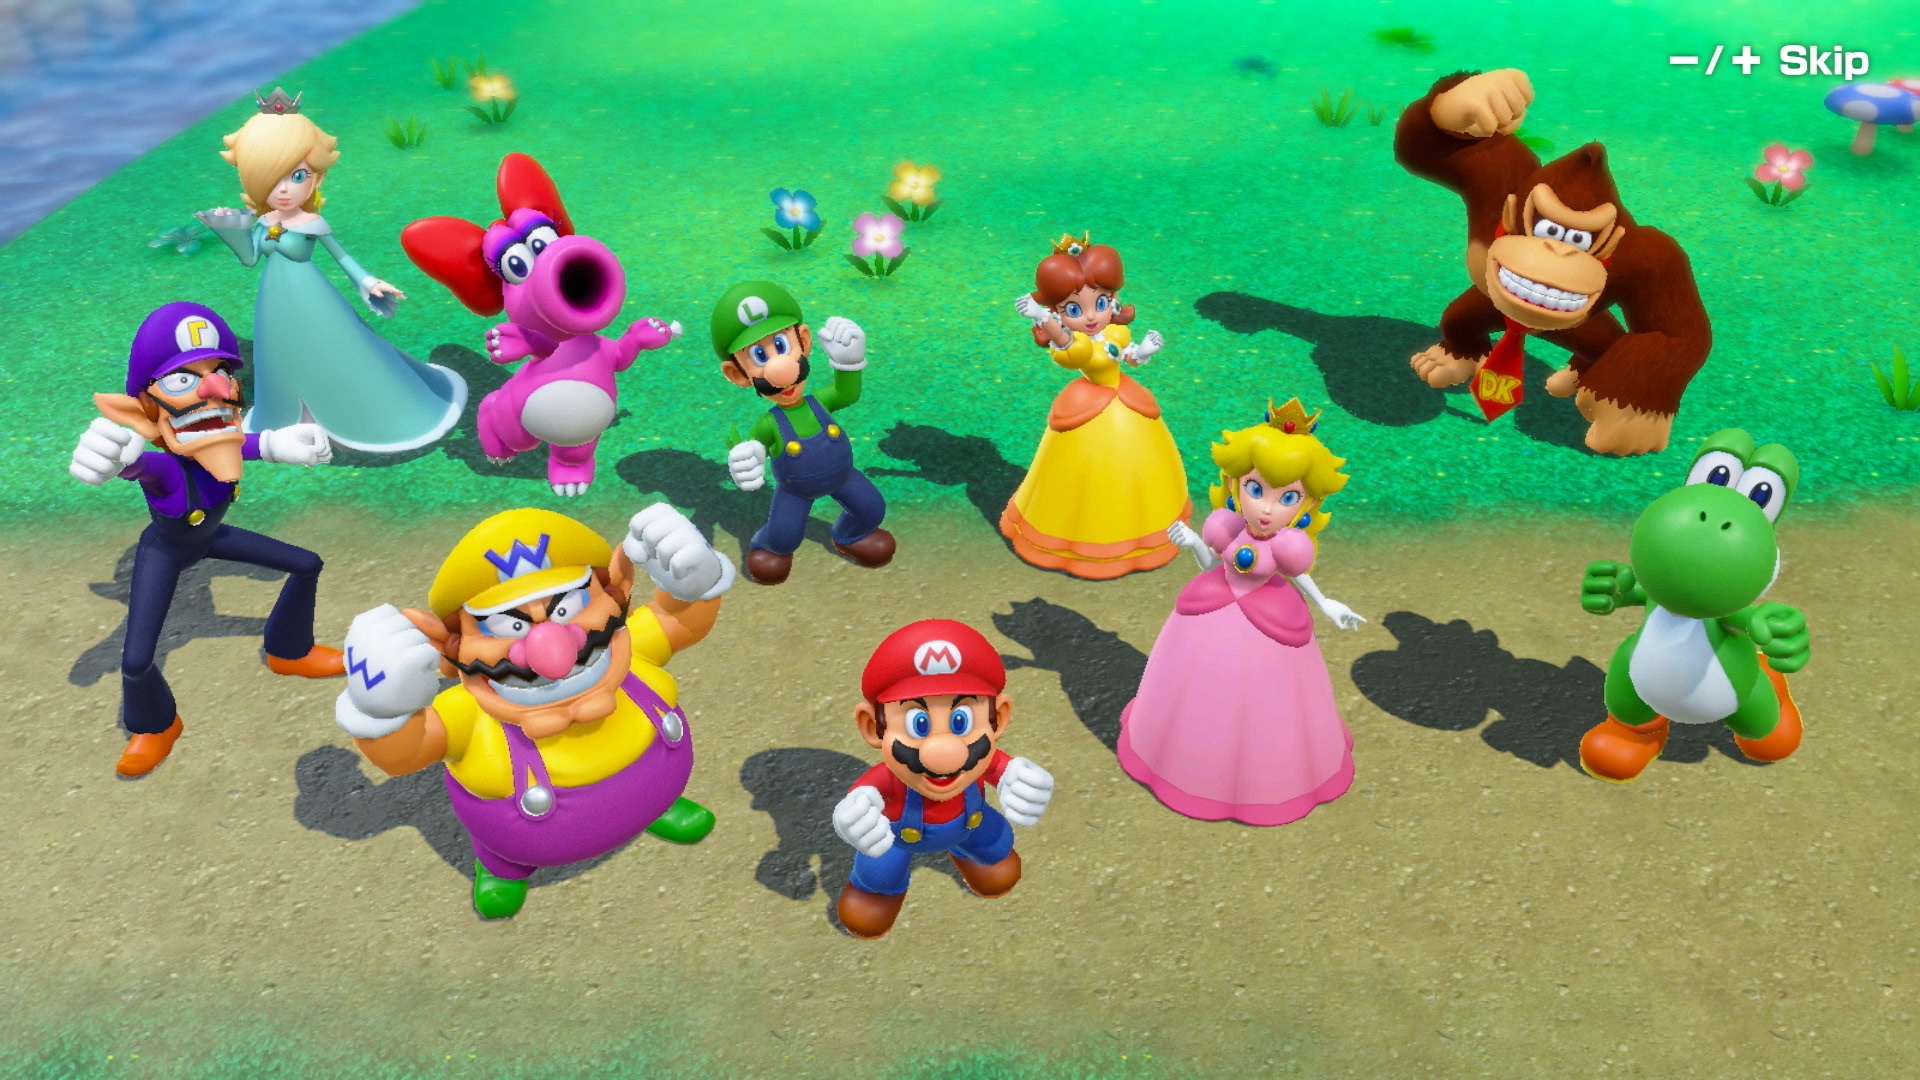 Mario Party Superstars Mod Adds Bowser Jr. As A Playable Character